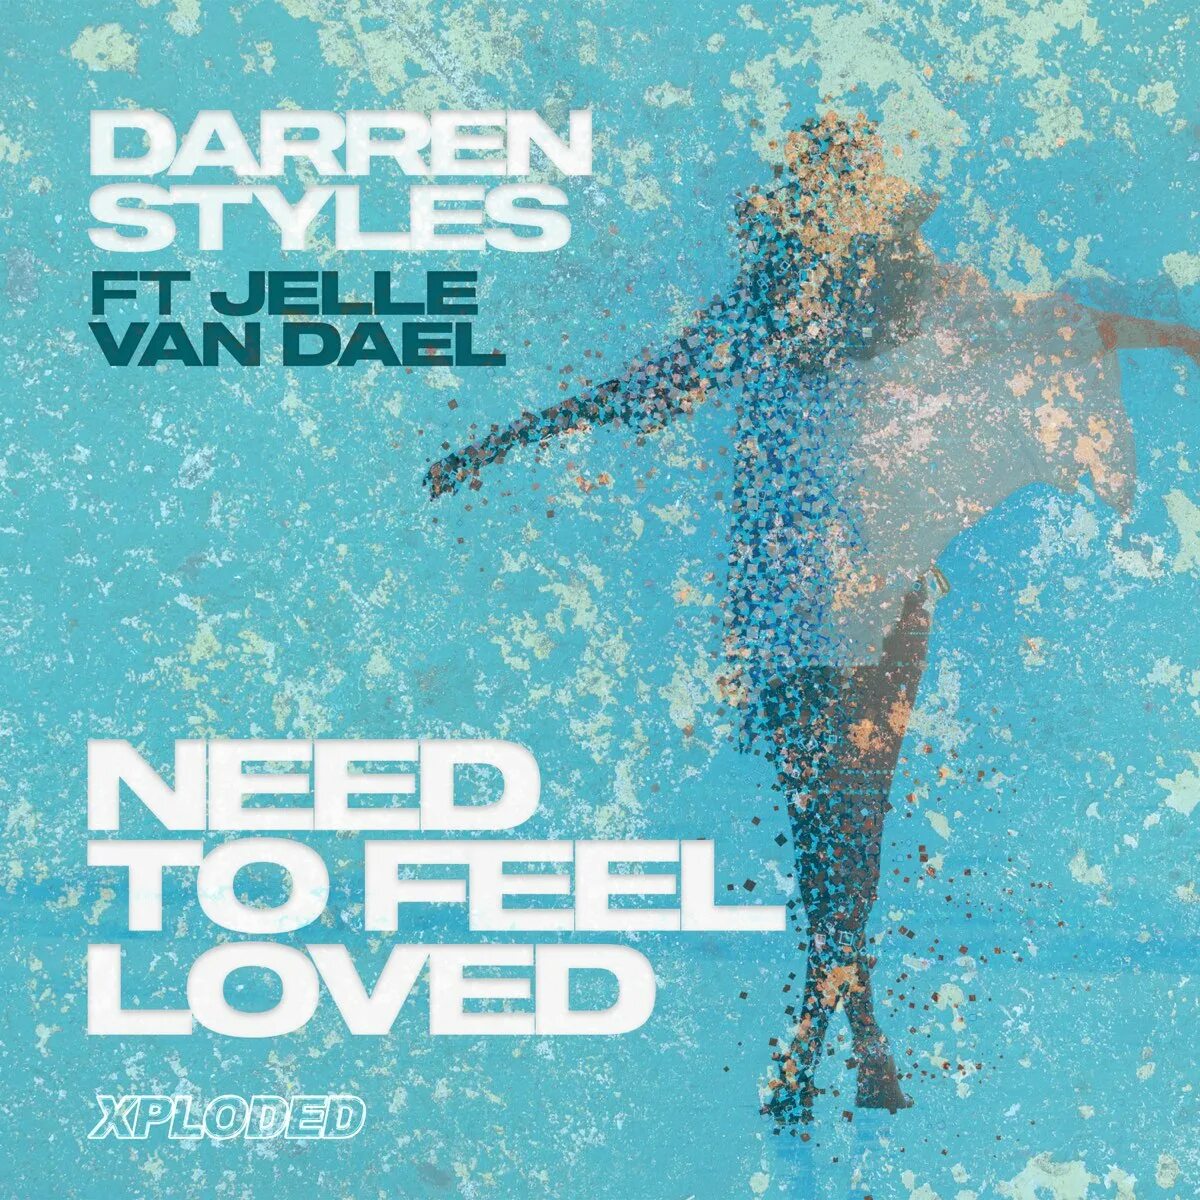 Need to feel loved feat delline bass. Need to feel Loved. Darren Styles,Jelle van Dael - need to feel Loved. Reflekt need to feel Loved. Album Art need to feel Loved need to feel Loved Delline Bass.